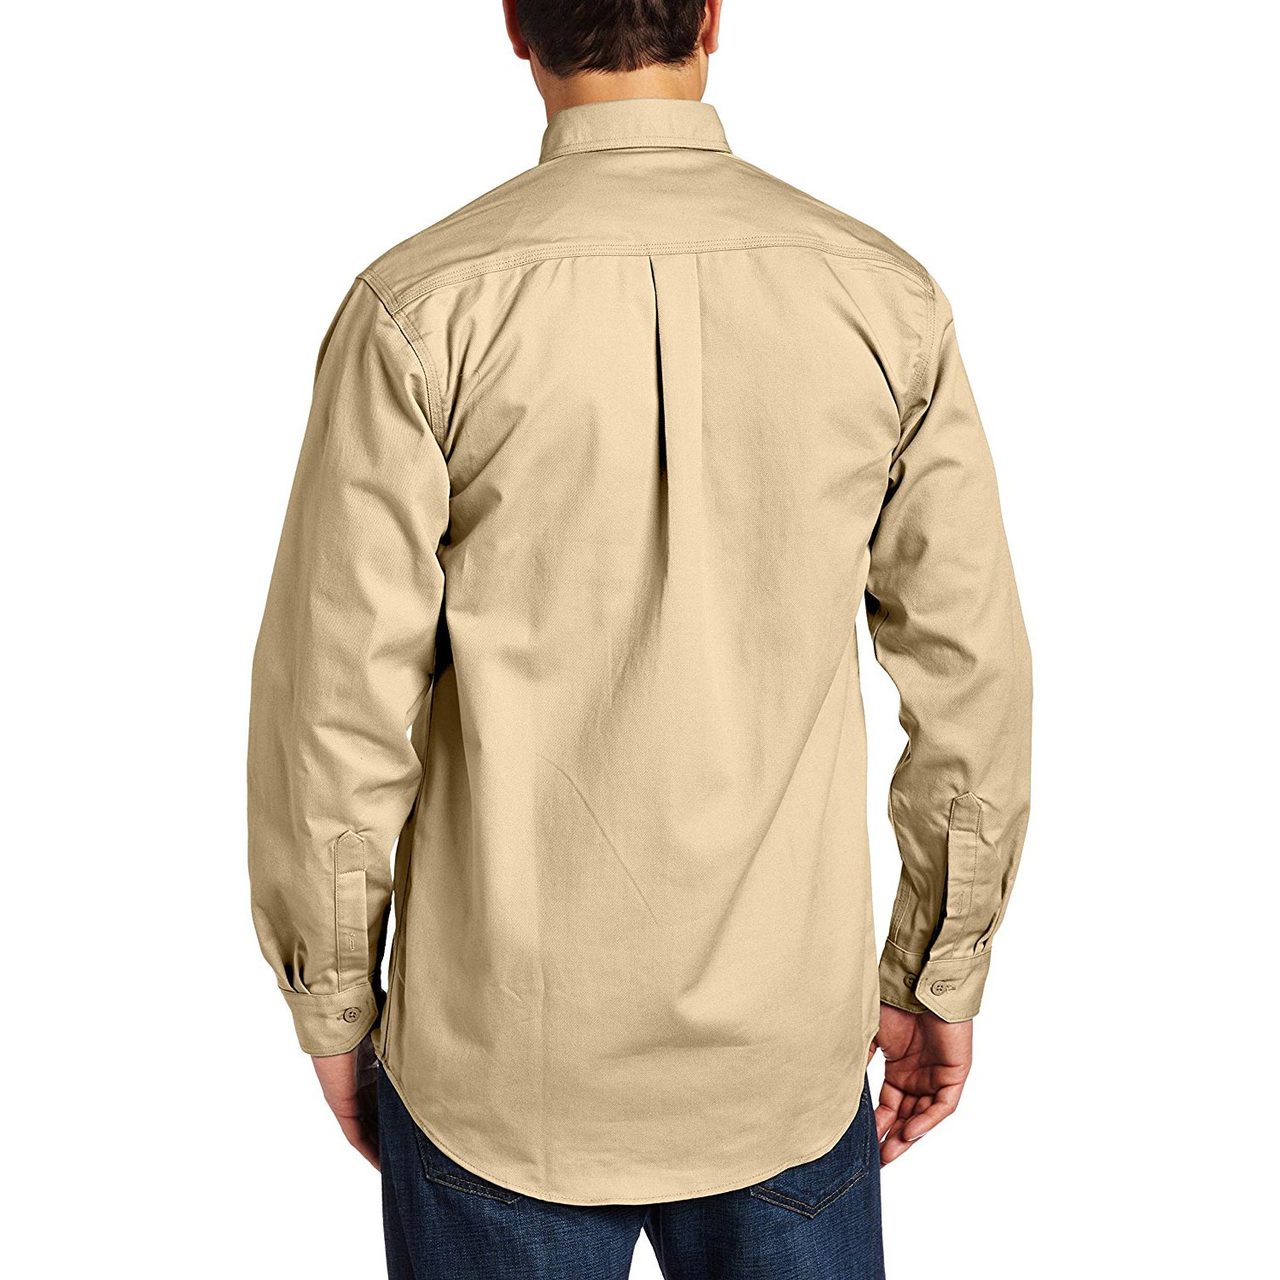 Carhartt Flame Resistant Twill Shirt with Pocket Flaps, FRS160